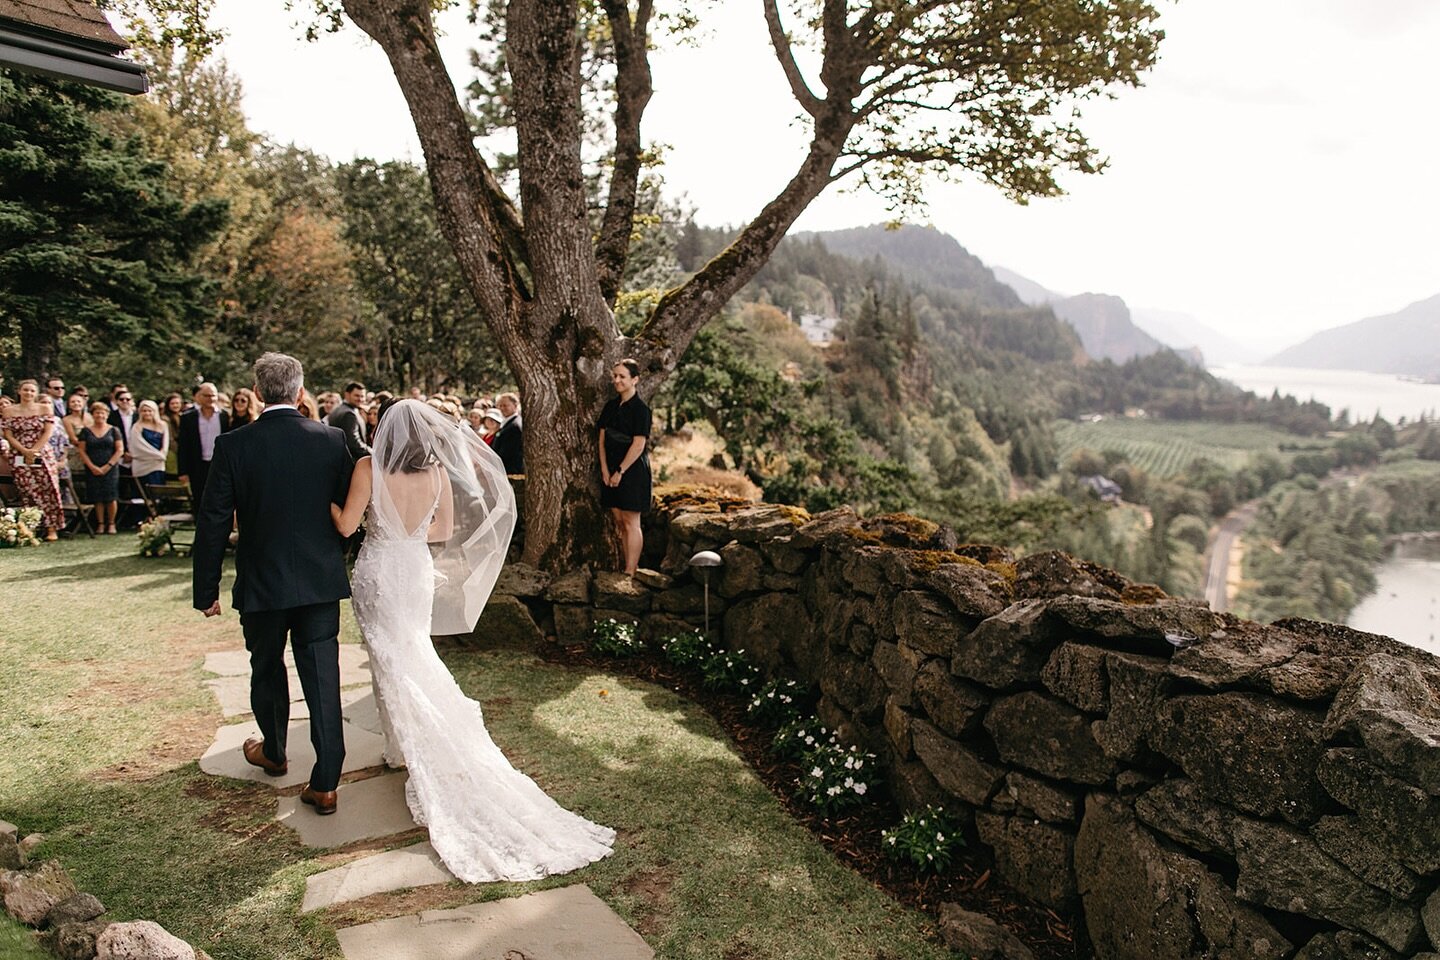 Somehow always hiding behind a tree 😂 

There&rsquo;s a good reason, ya know &mdash; we always want to ensure your wedding ceremony processional goes off without a hitch, and the key is to make sure we have a visual on what&rsquo;s going on up front